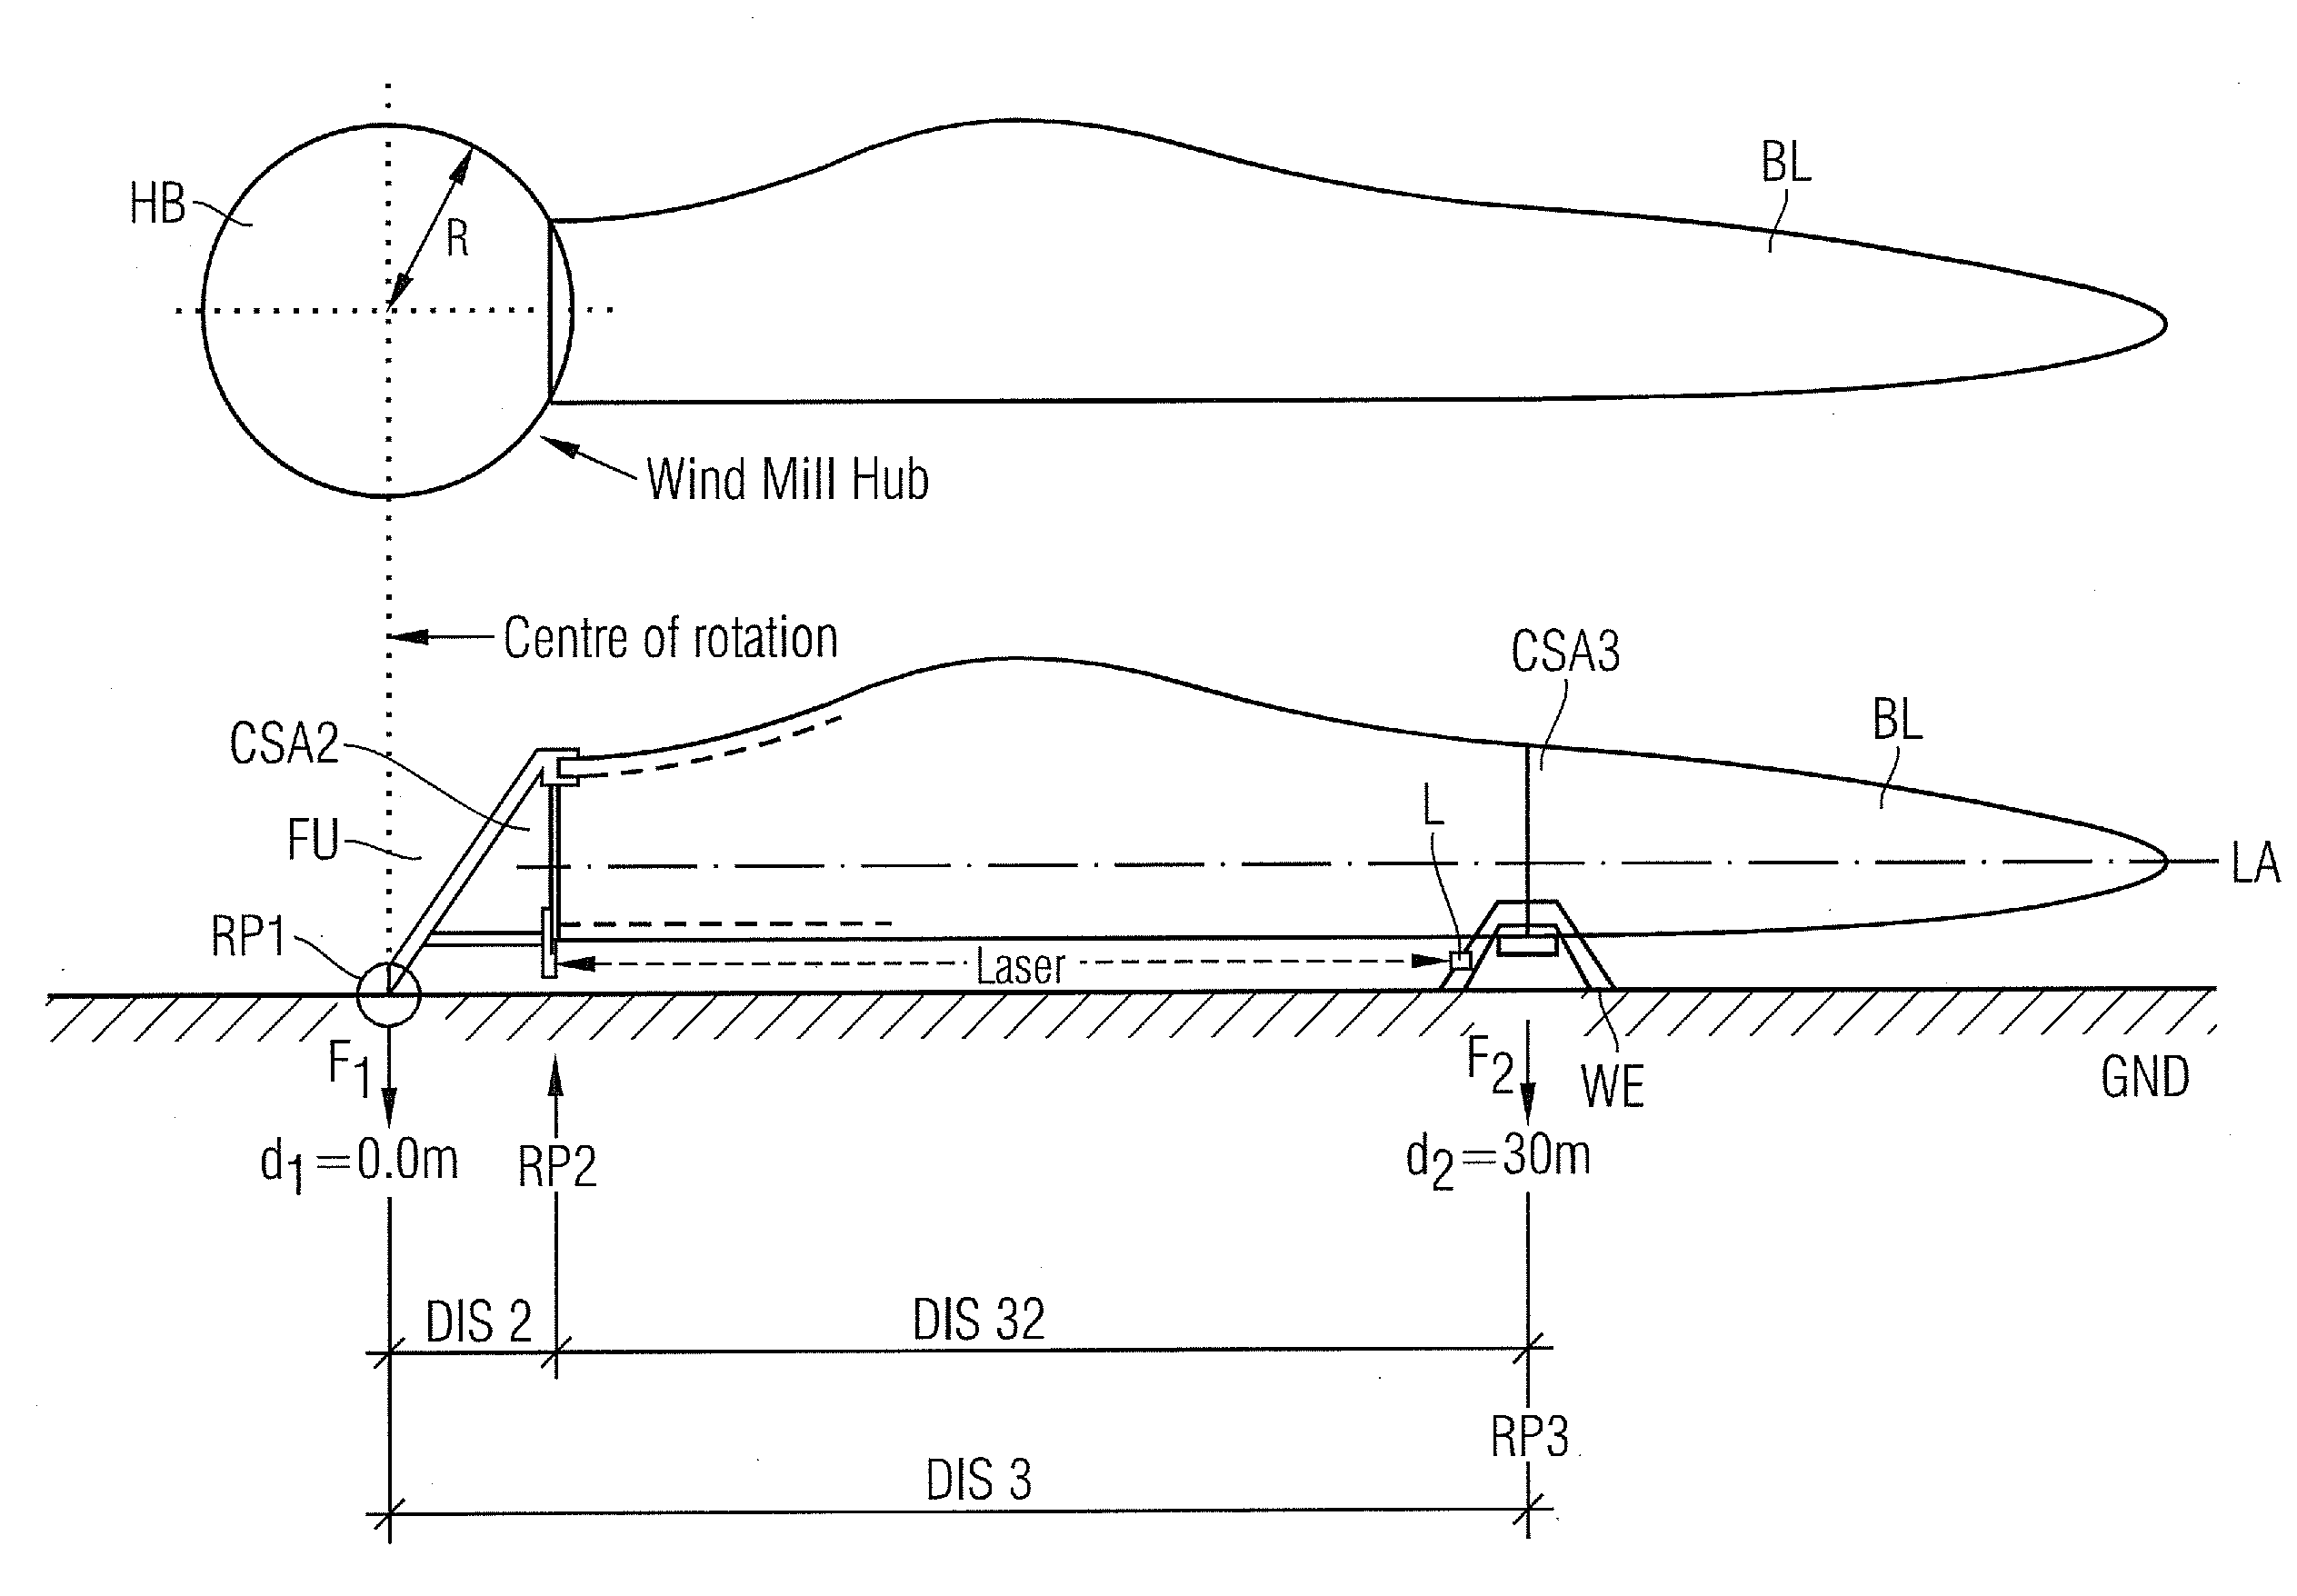 Arrangement to Determine a Static Moment of a Blade